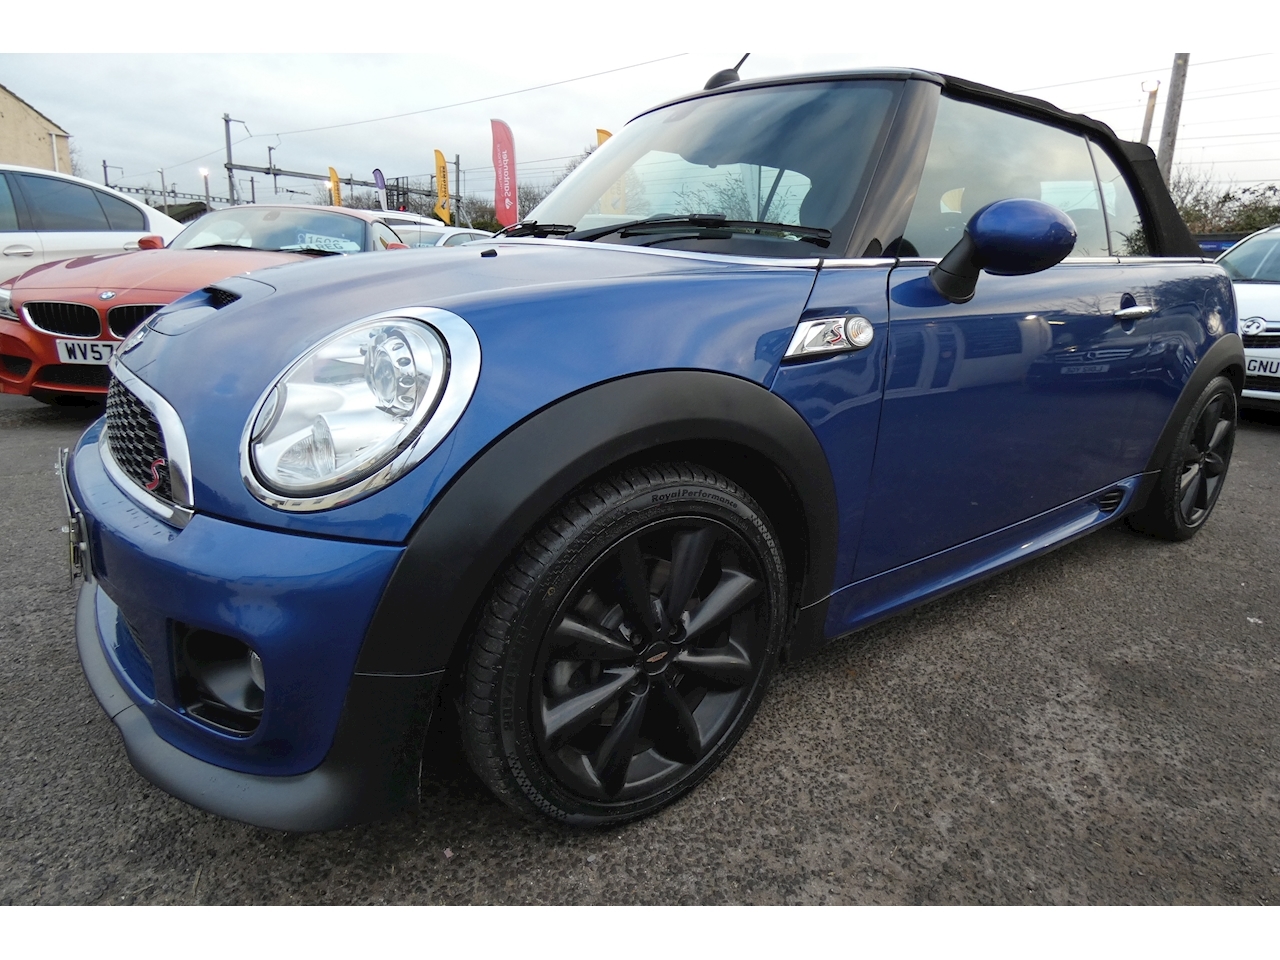 1.6 Cooper S Convertible 2dr Petrol Automatic (153 g/km, 190 bhp)